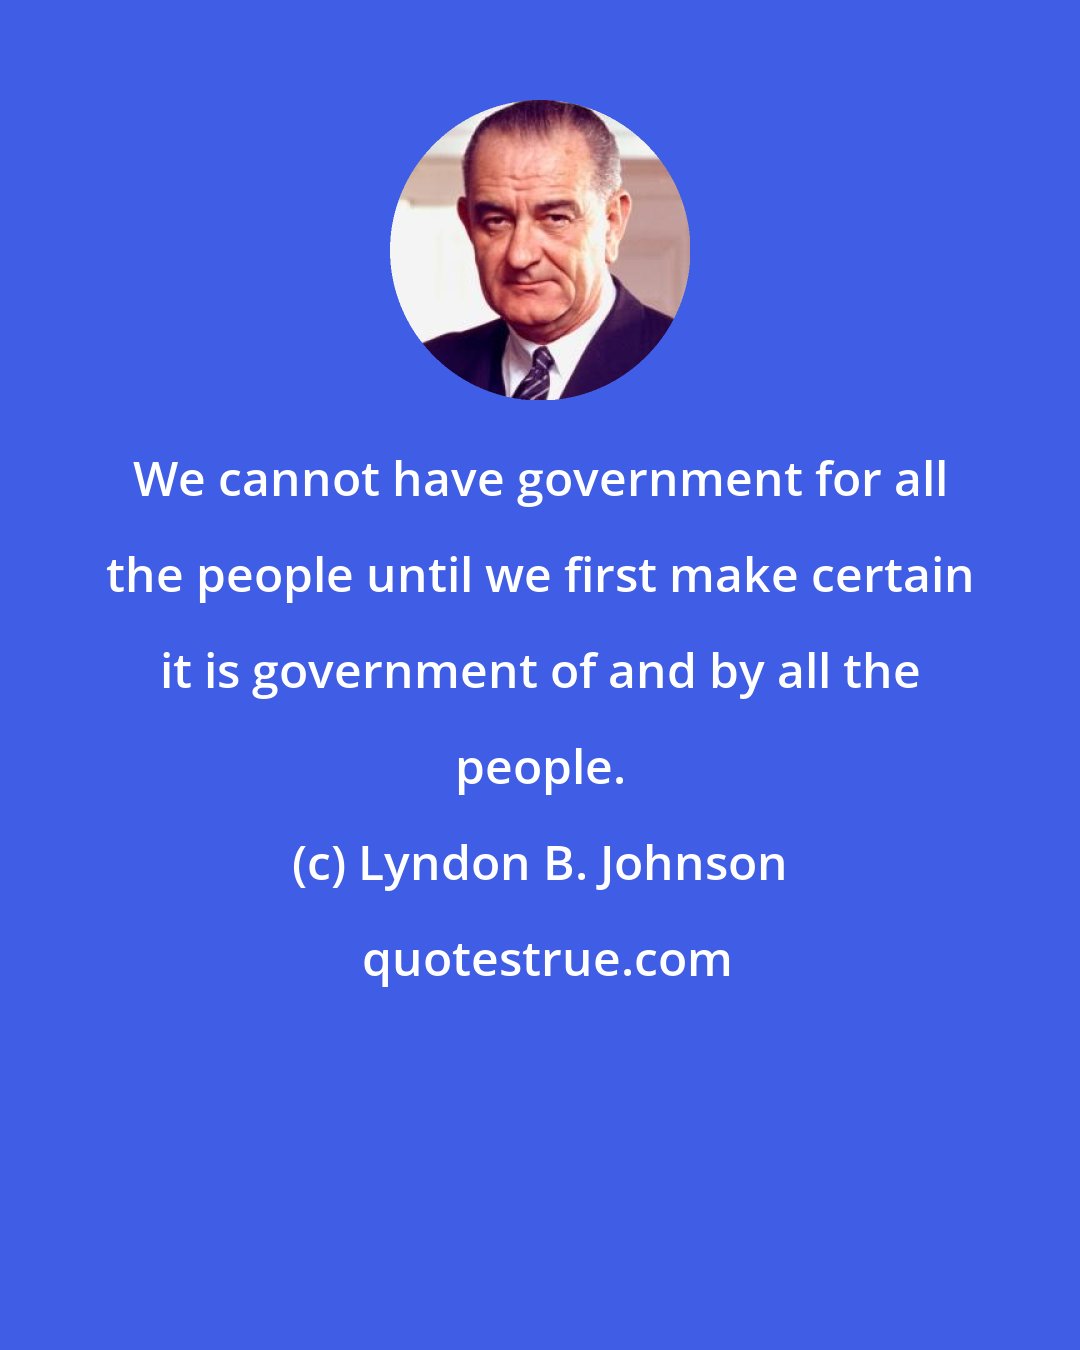 Lyndon B. Johnson: We cannot have government for all the people until we first make certain it is government of and by all the people.